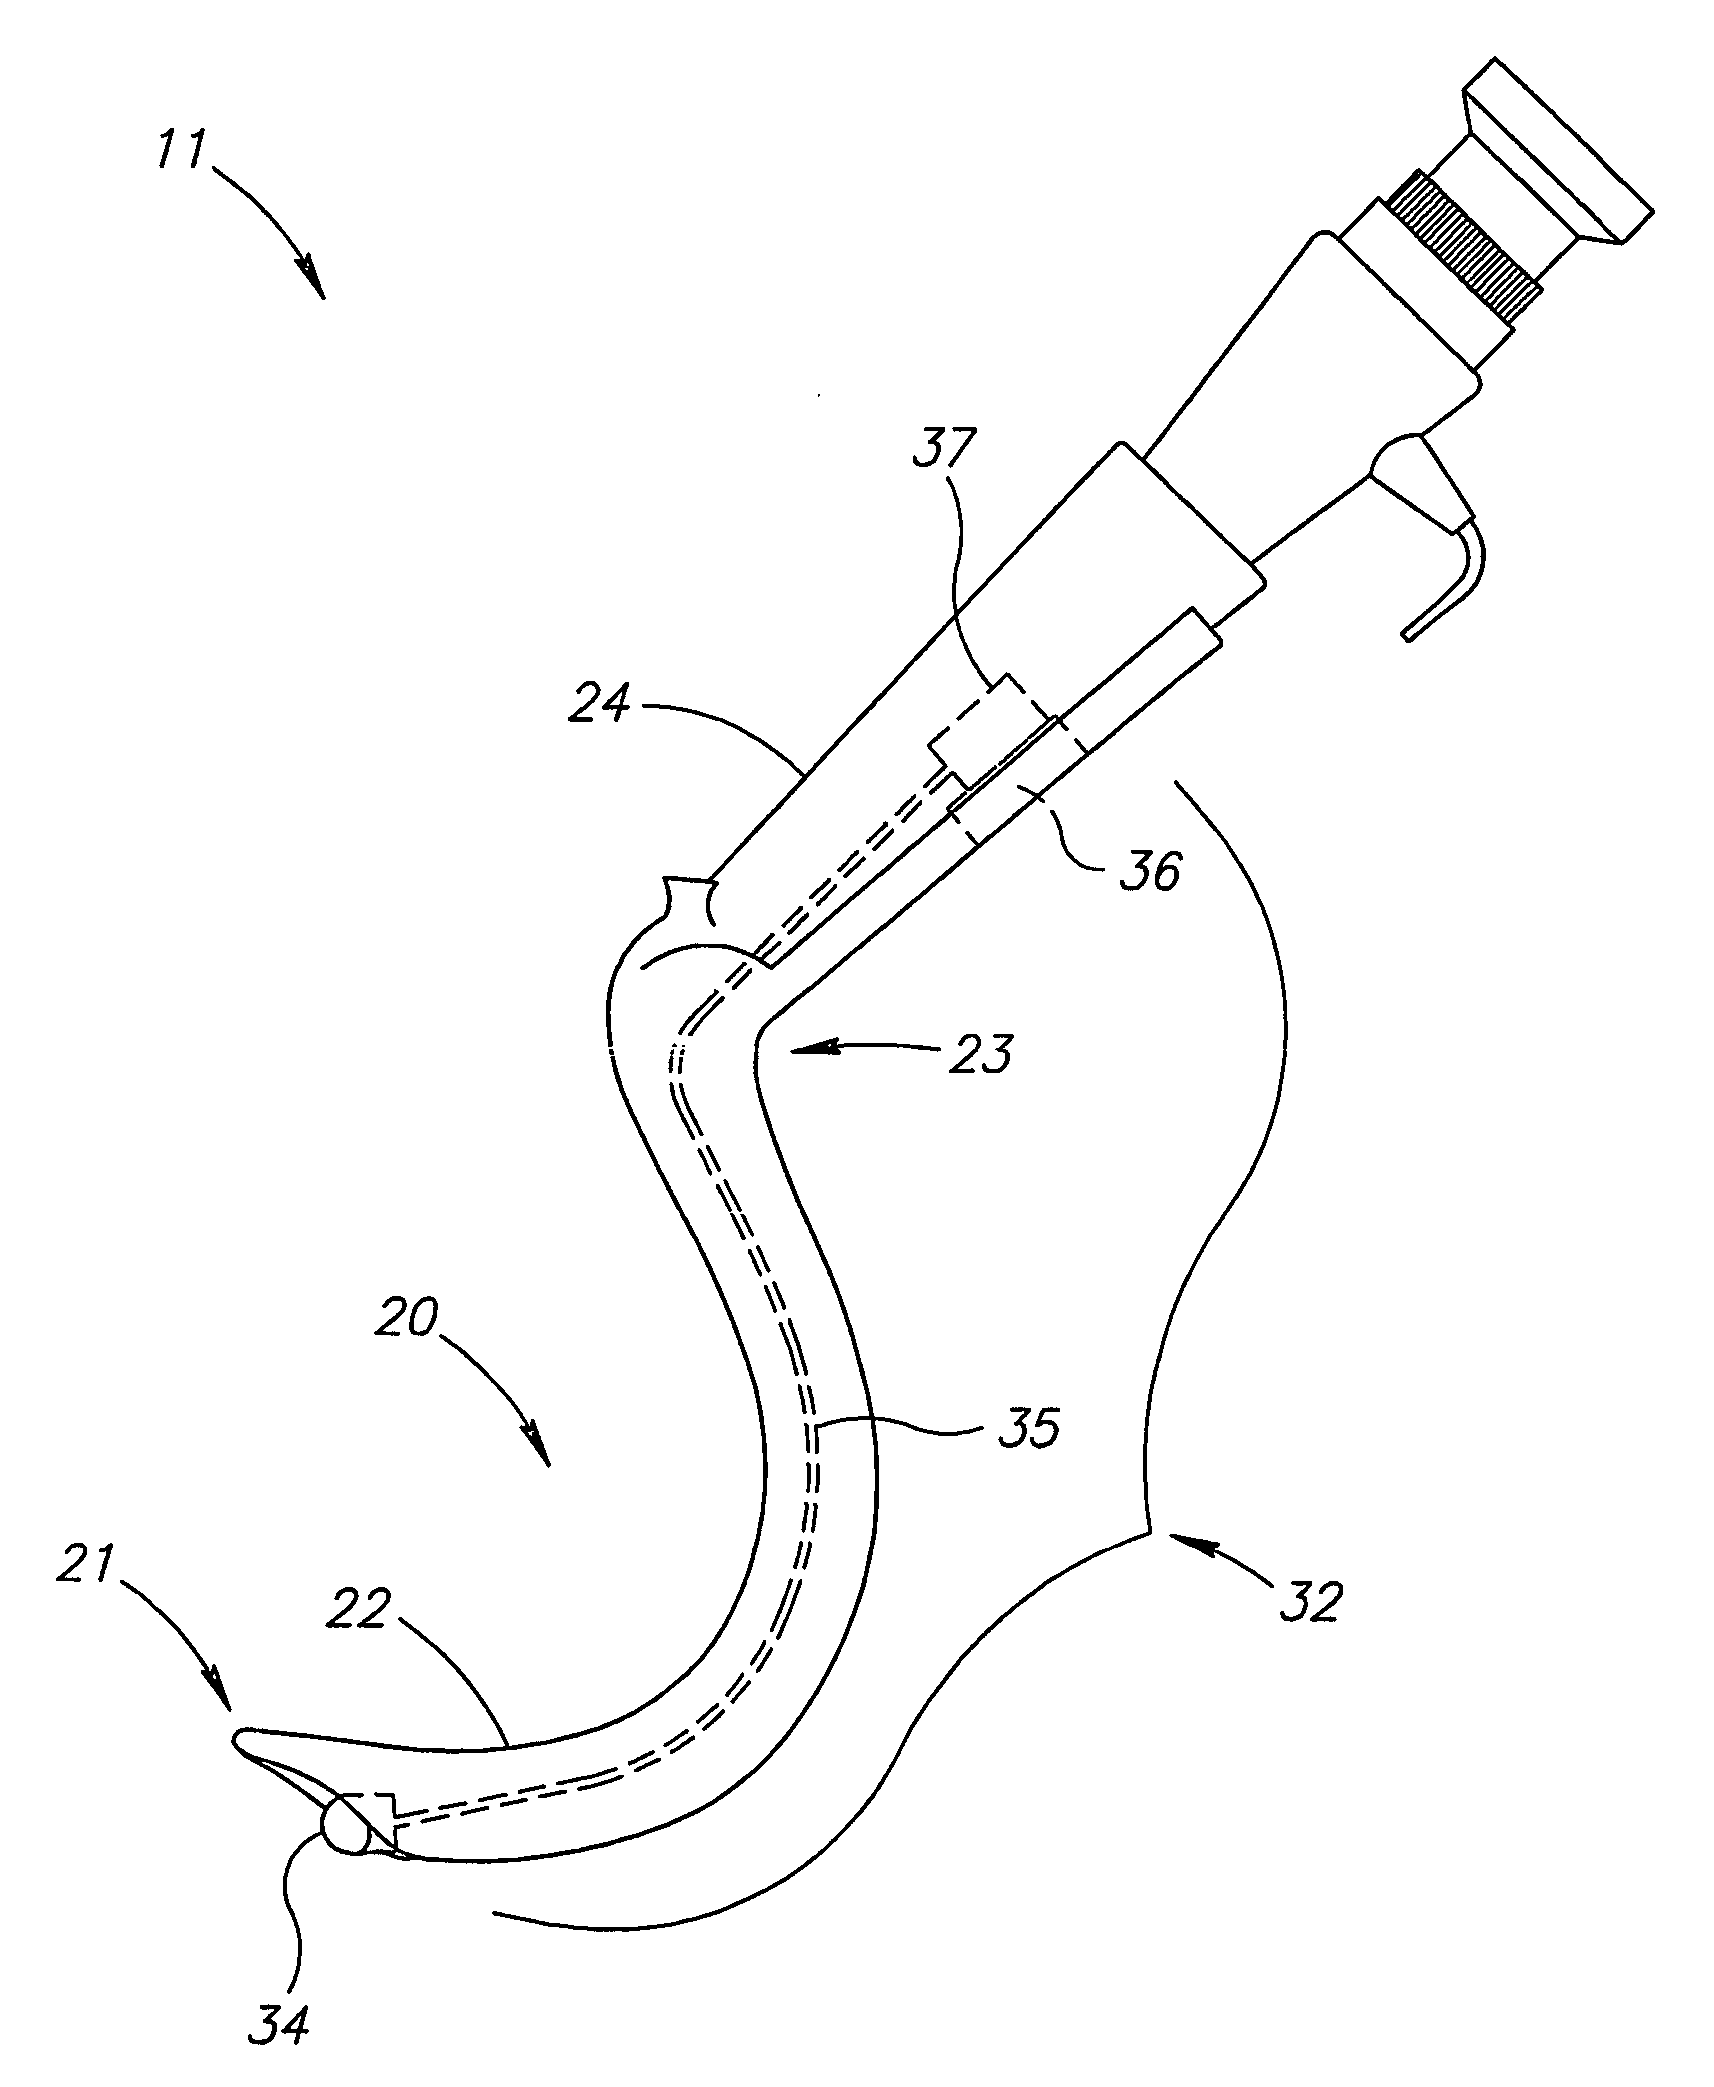 Intubation and imaging device and system